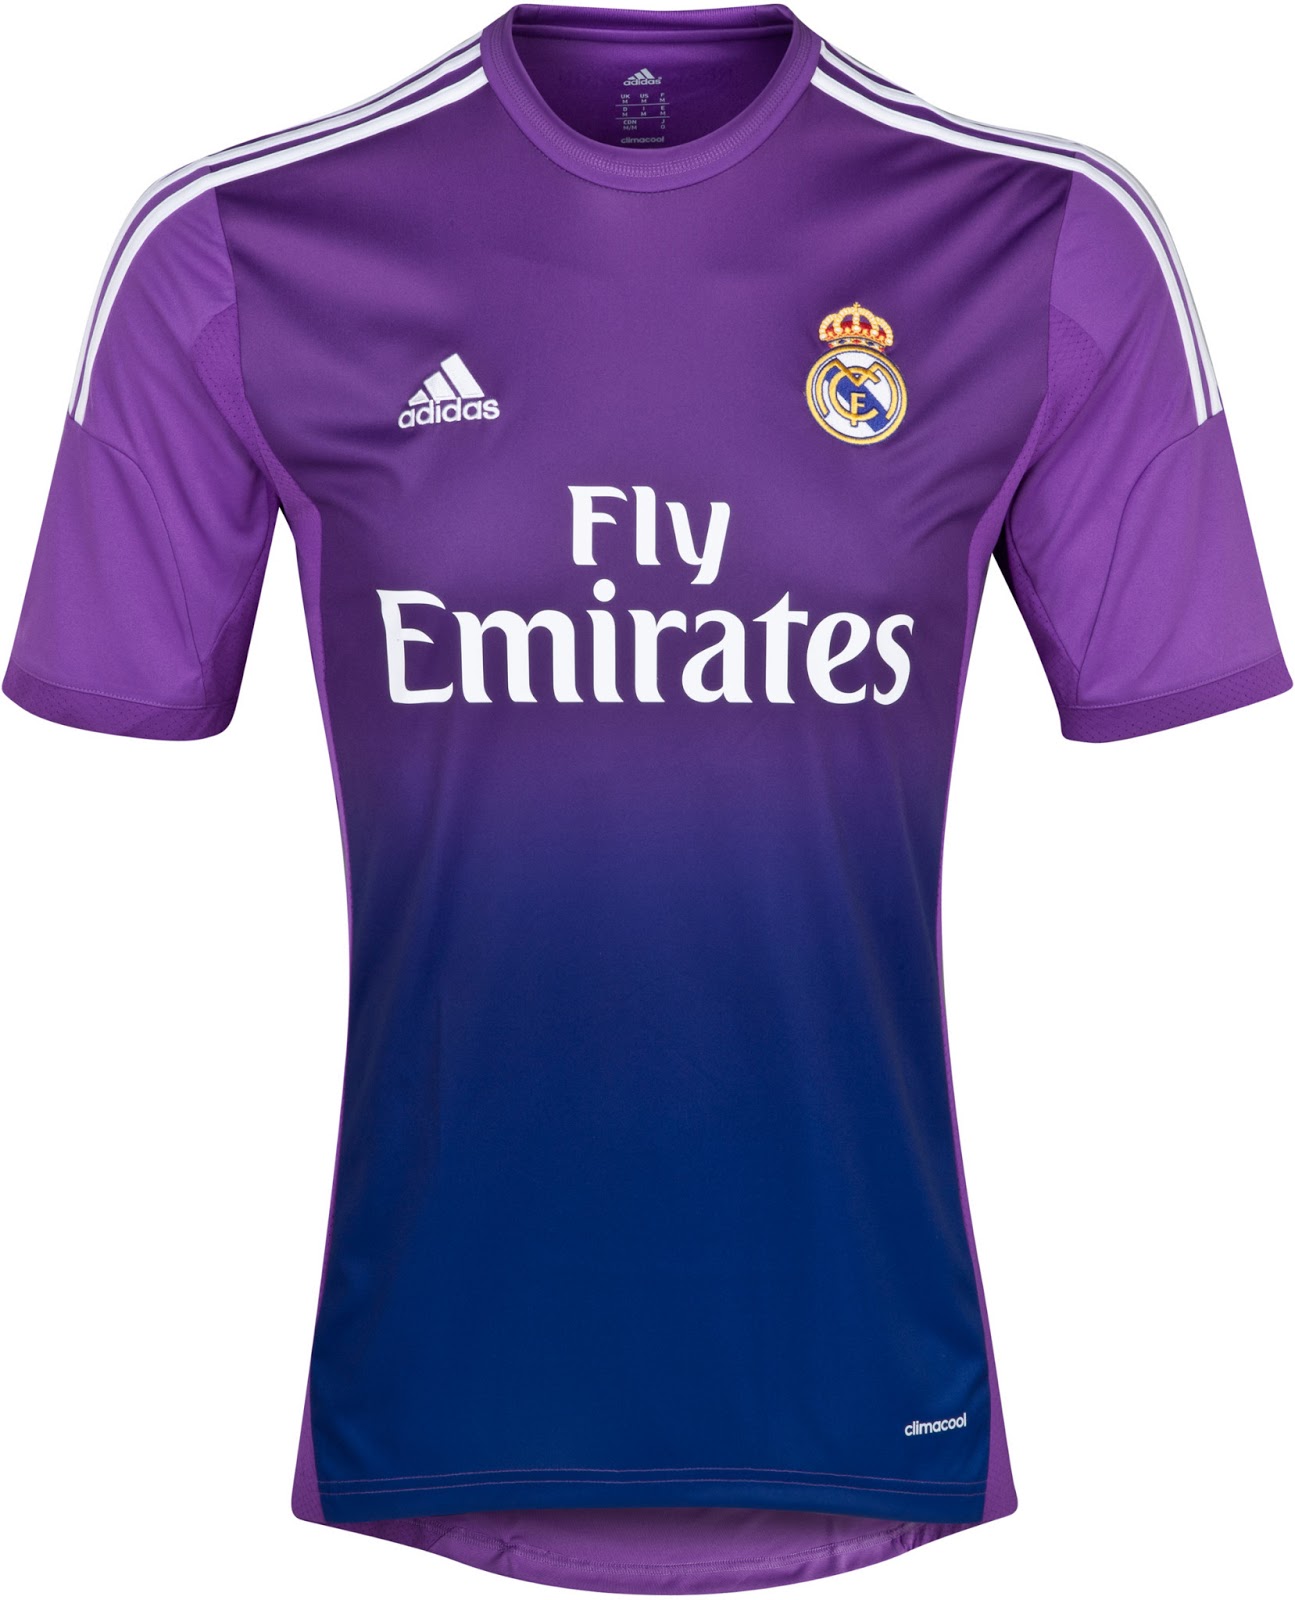 Real Madrid 13 14 Home And Away Kits Released Third Kits Leaked